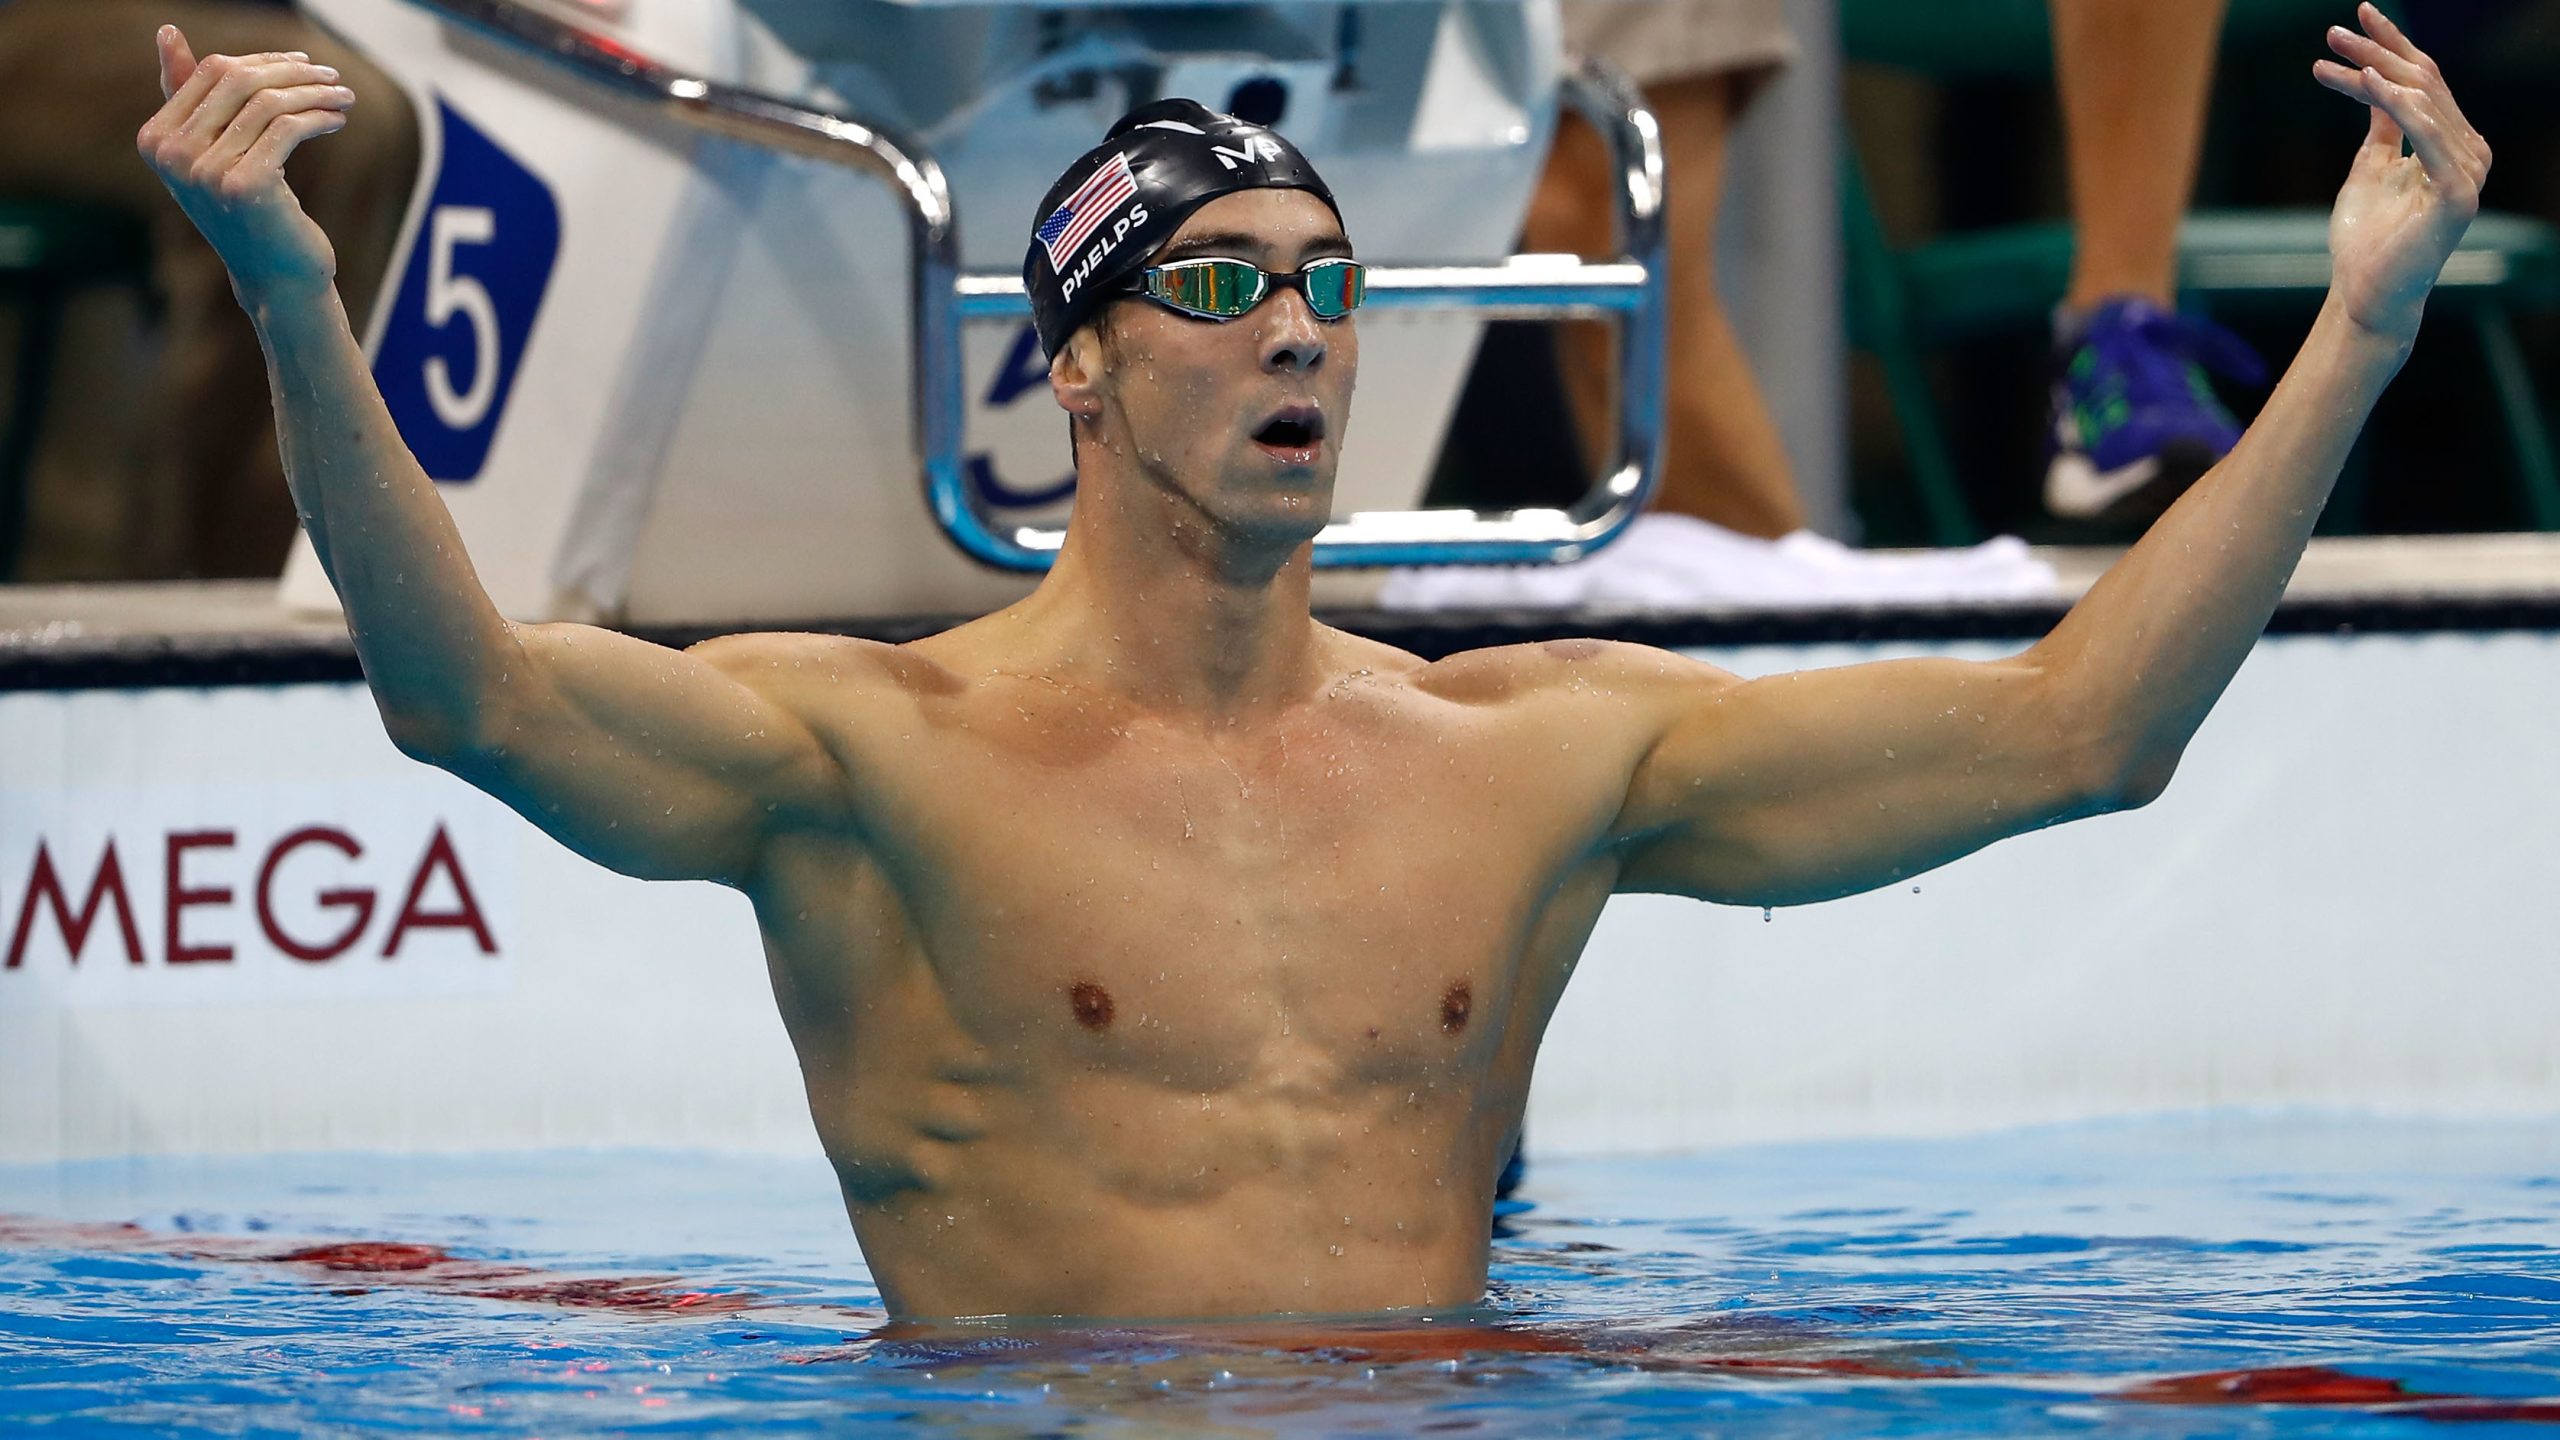 Michael Phelps Illness: A Look at the Mental Health Struggles of a Champion